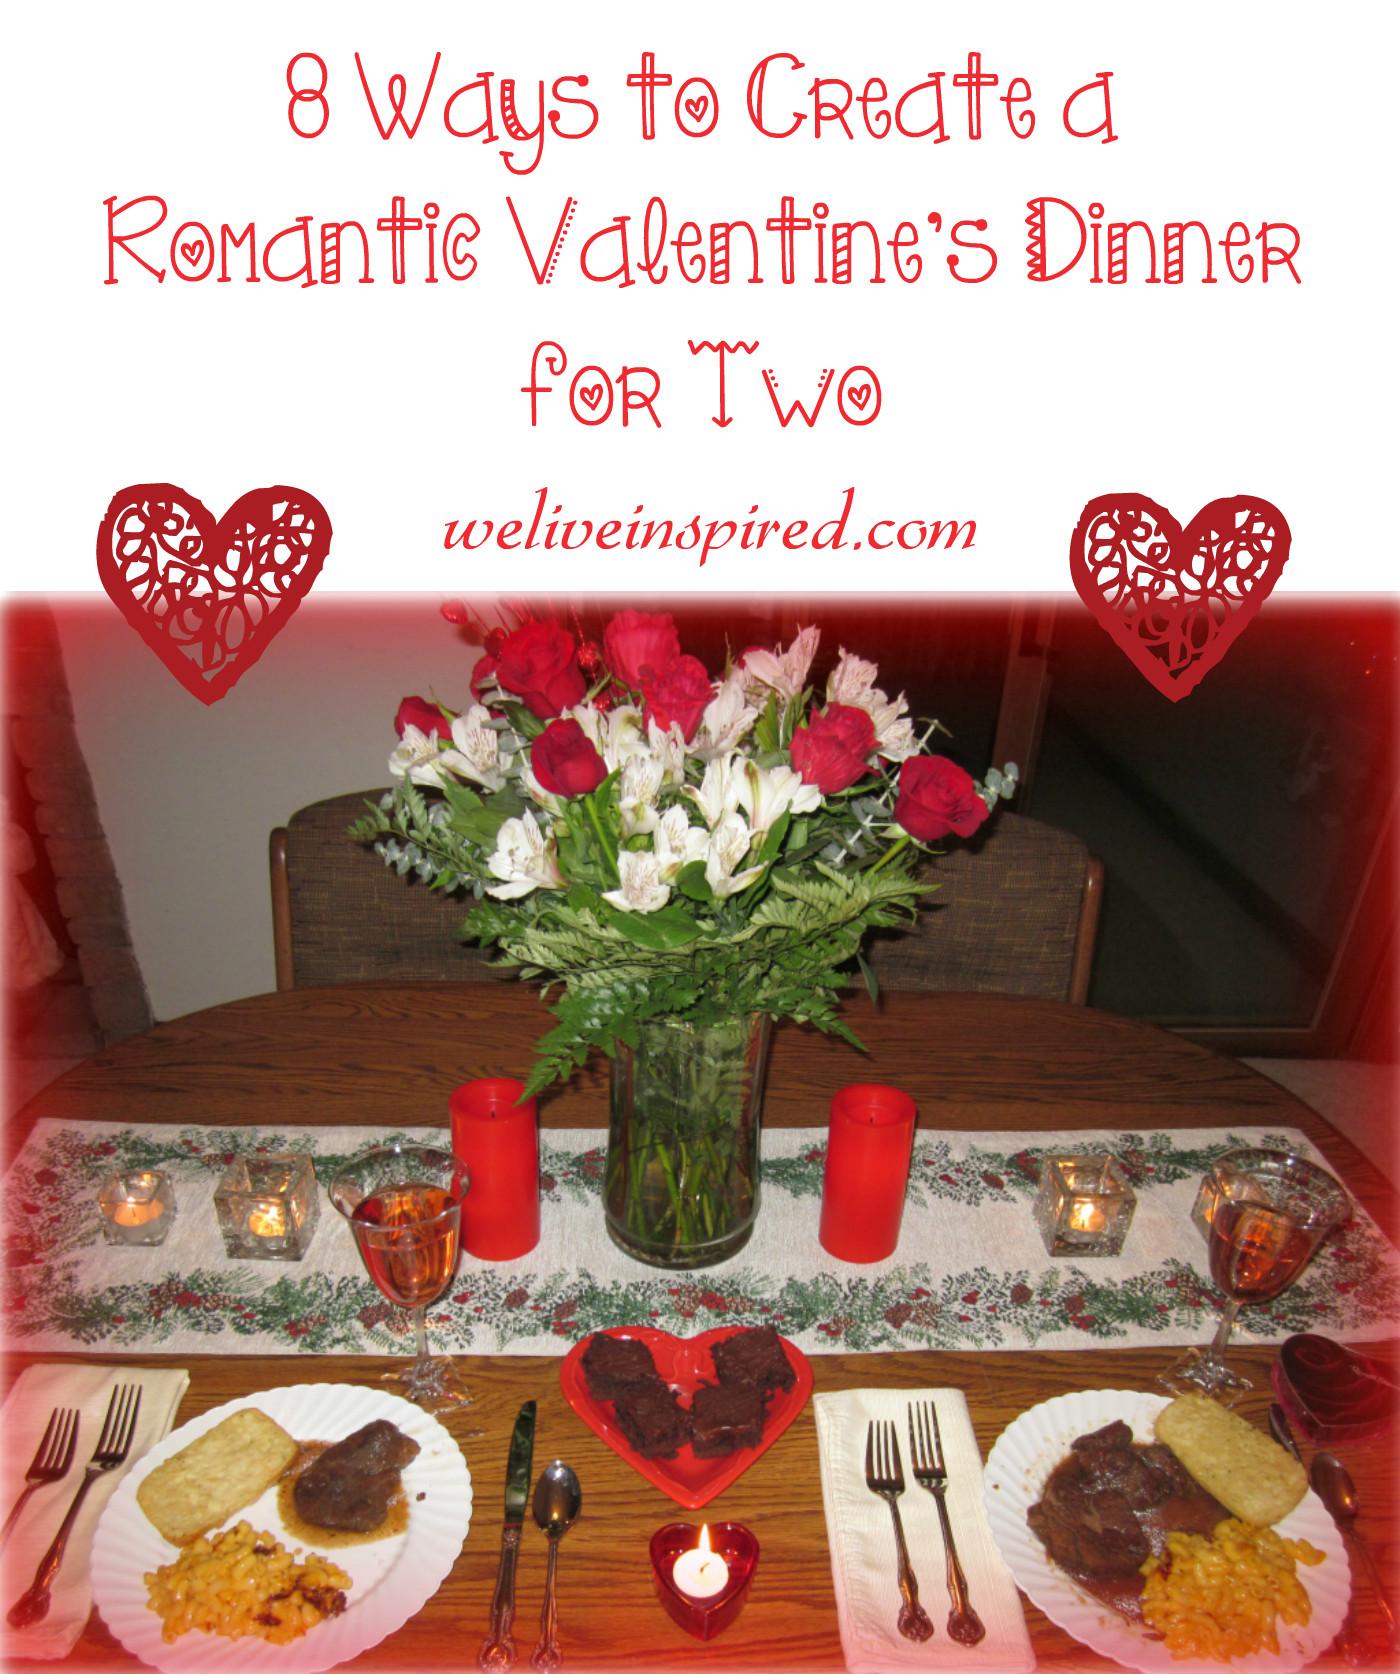 Romantic Valentine Dinners
 8 Ways to Create a Romantic Valentine s Day Dinner for Two